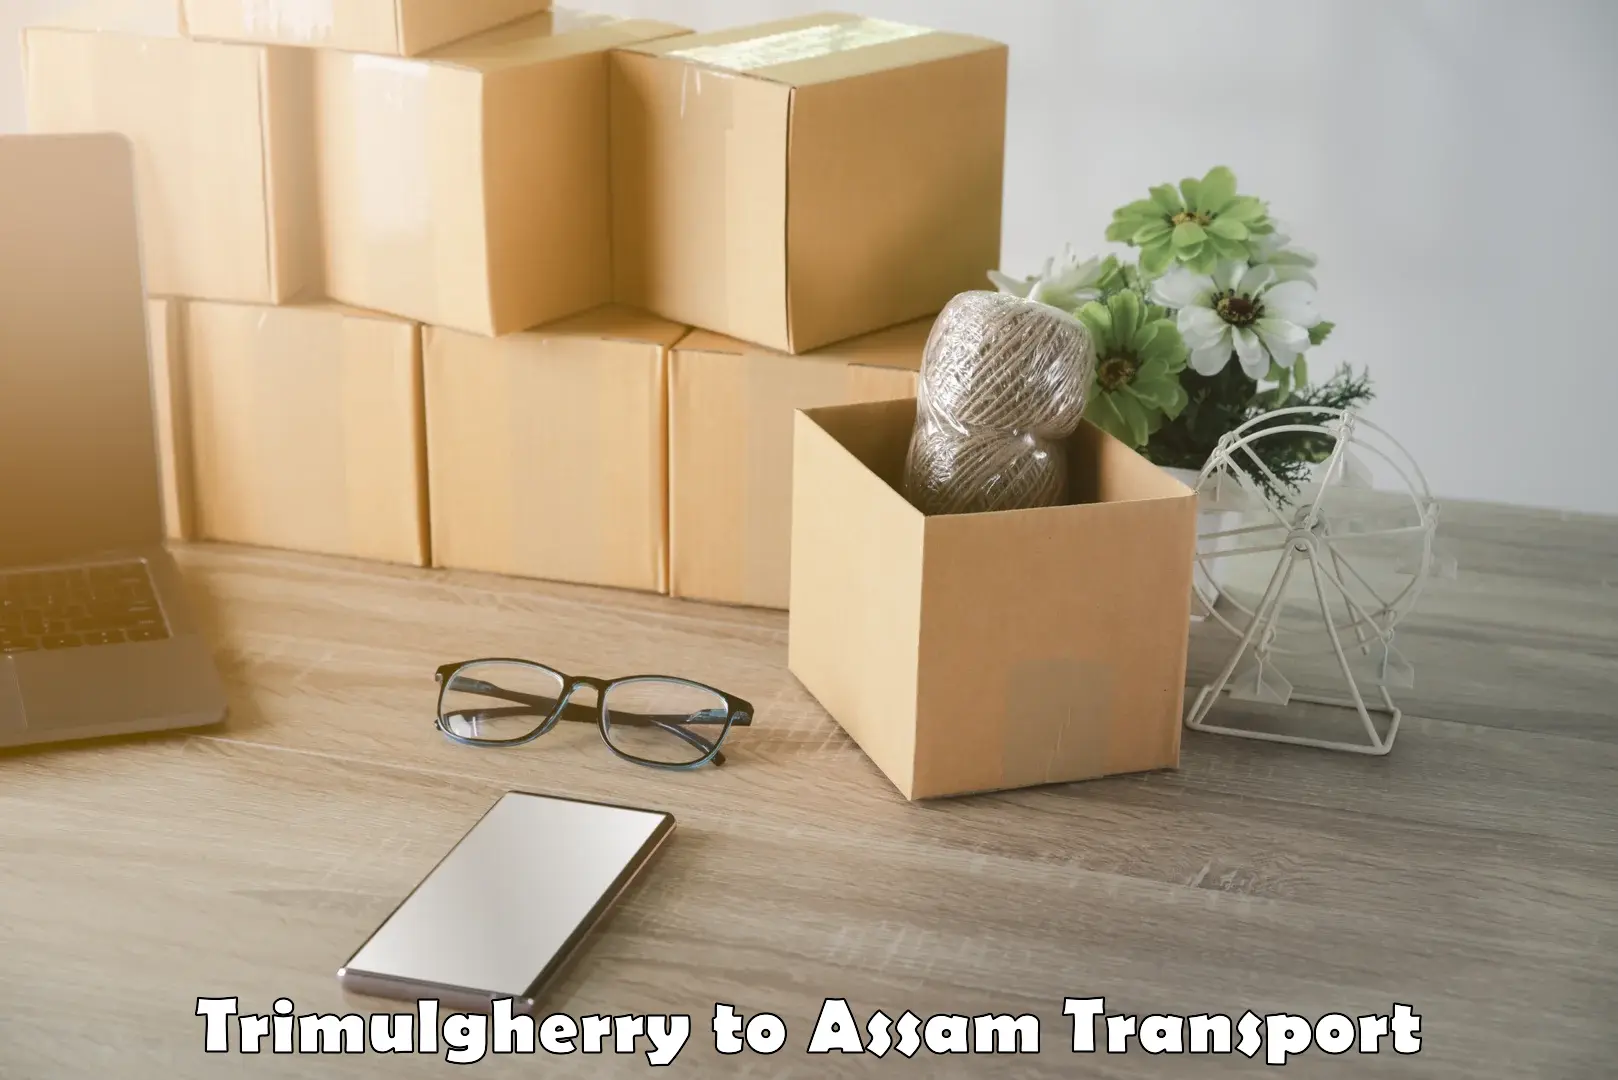 Road transport services Trimulgherry to Assam